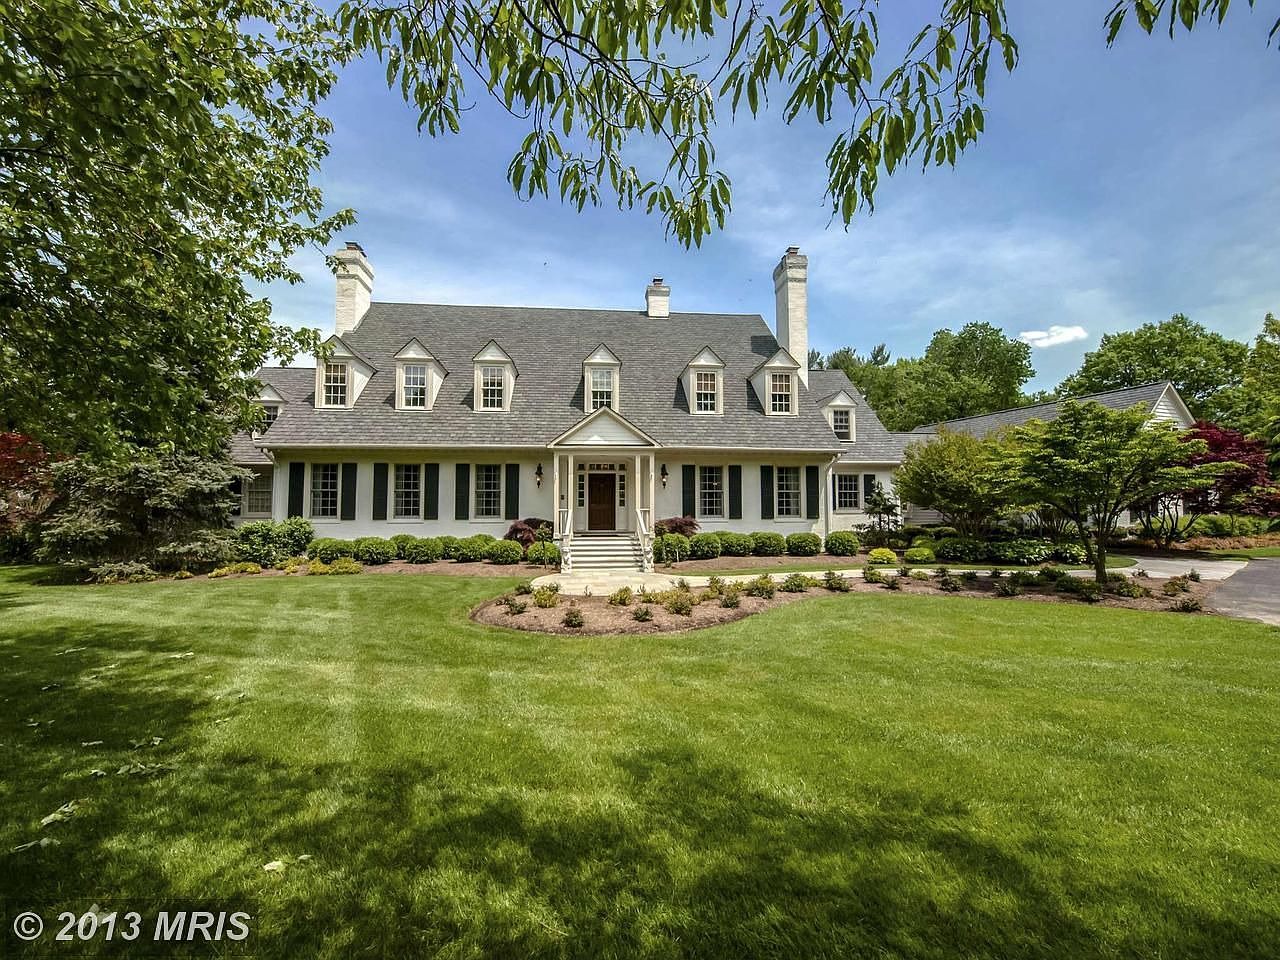 10701 Alloway Dr, Rockville, MD 20854 | Zillow